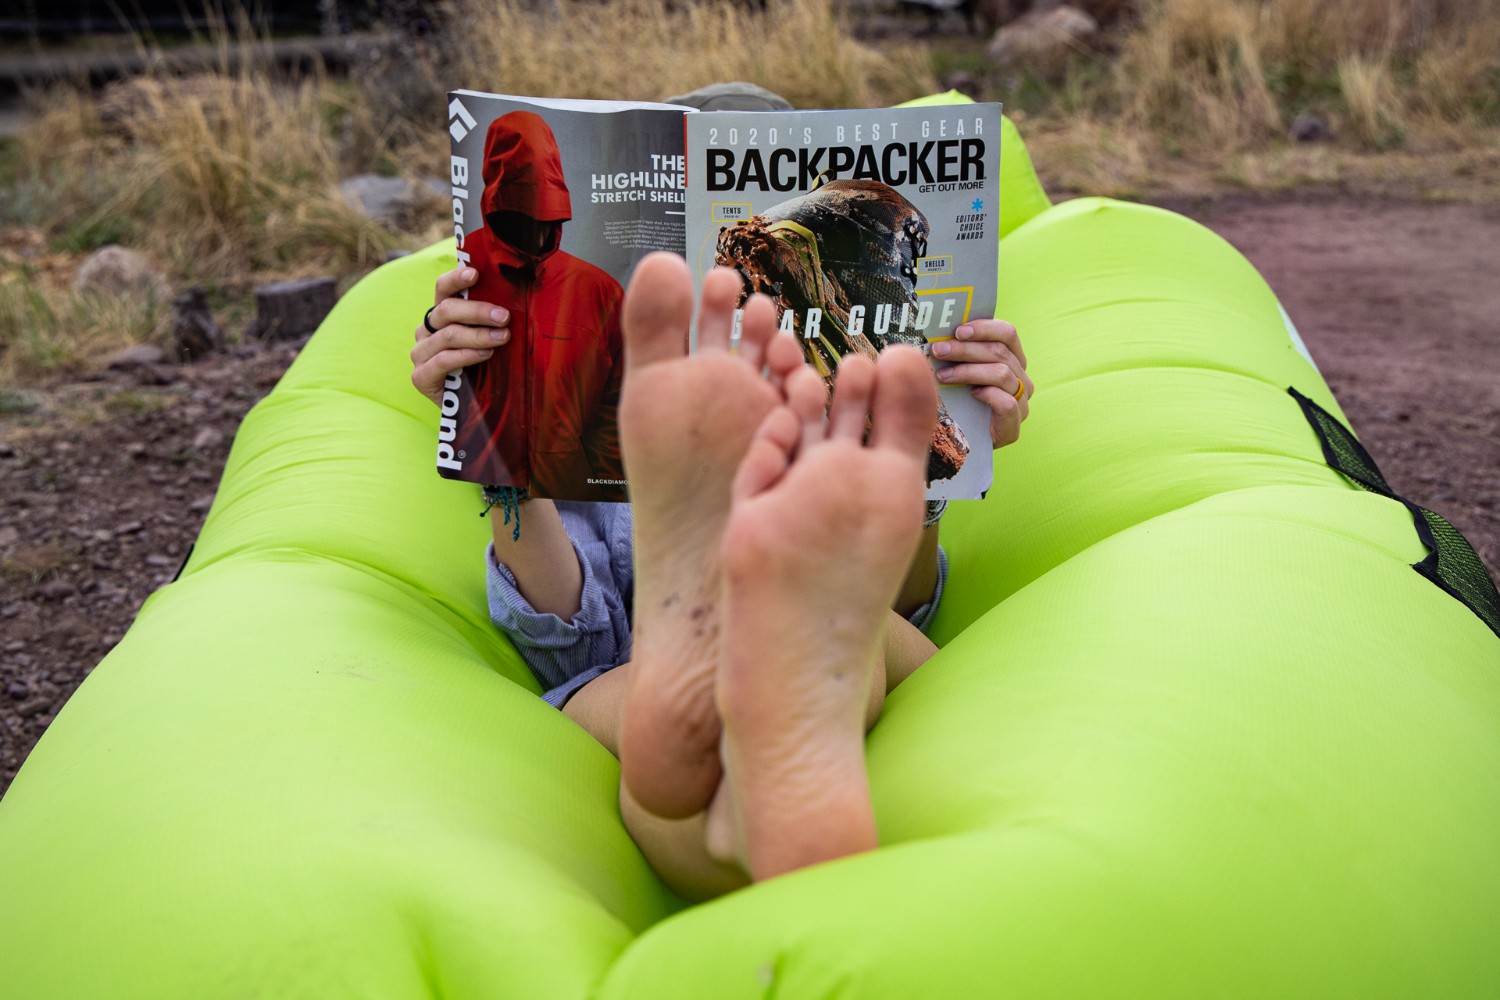 feet up relaxing on an inflatable while reading a magazine